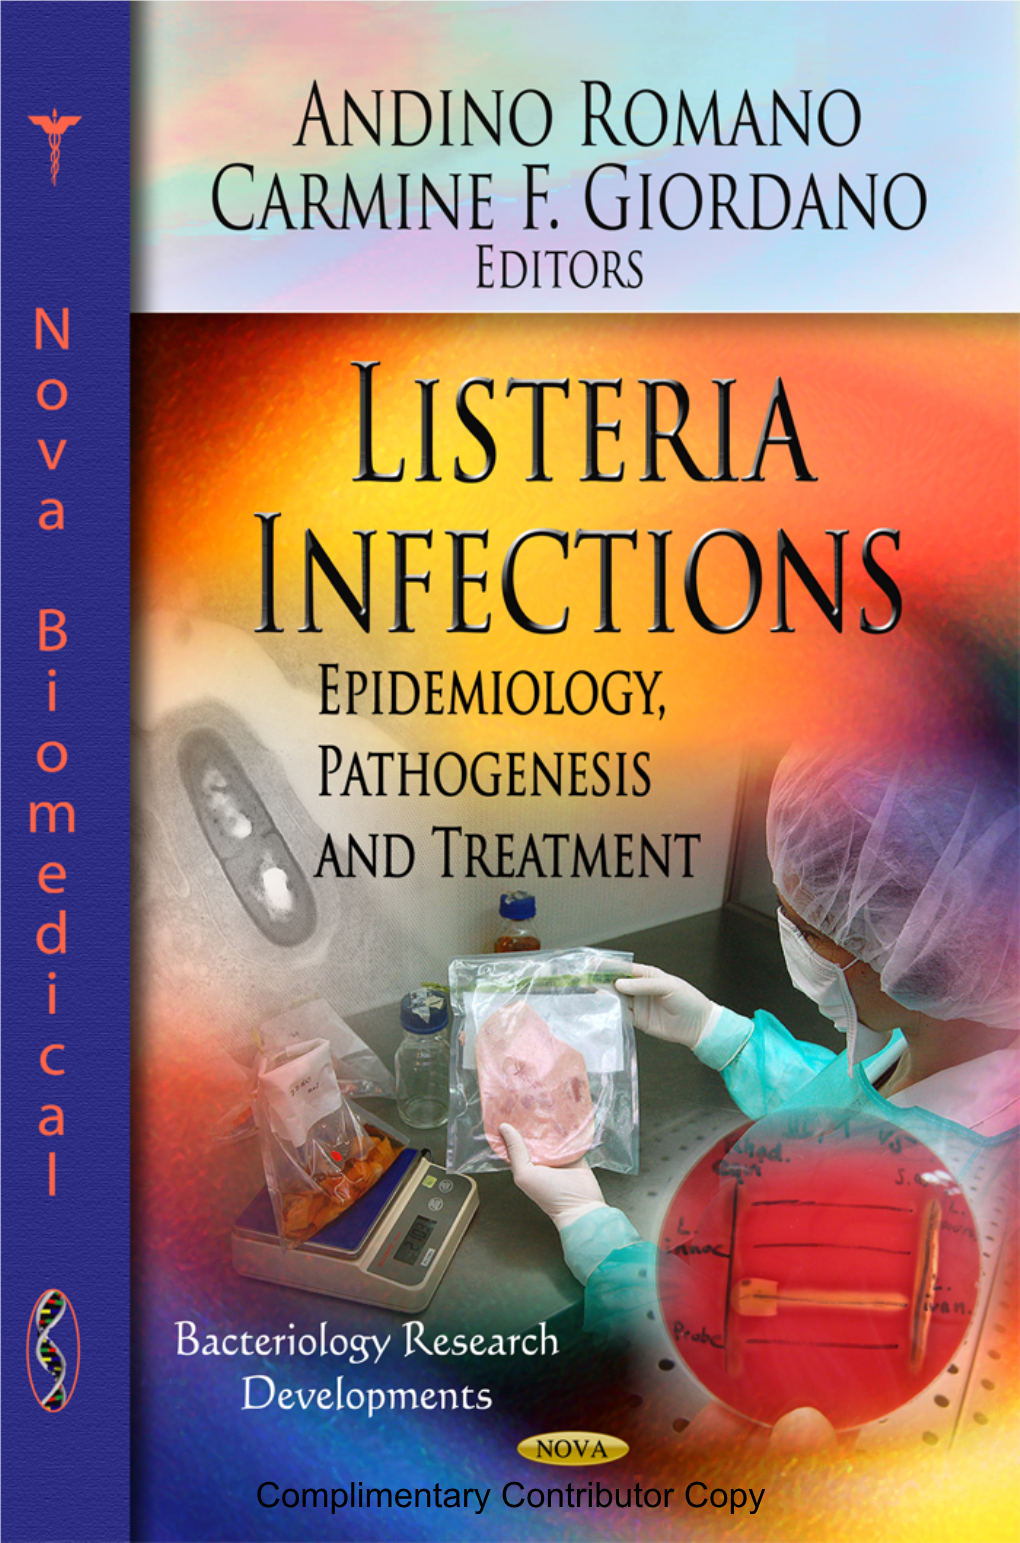 Listeria Infections